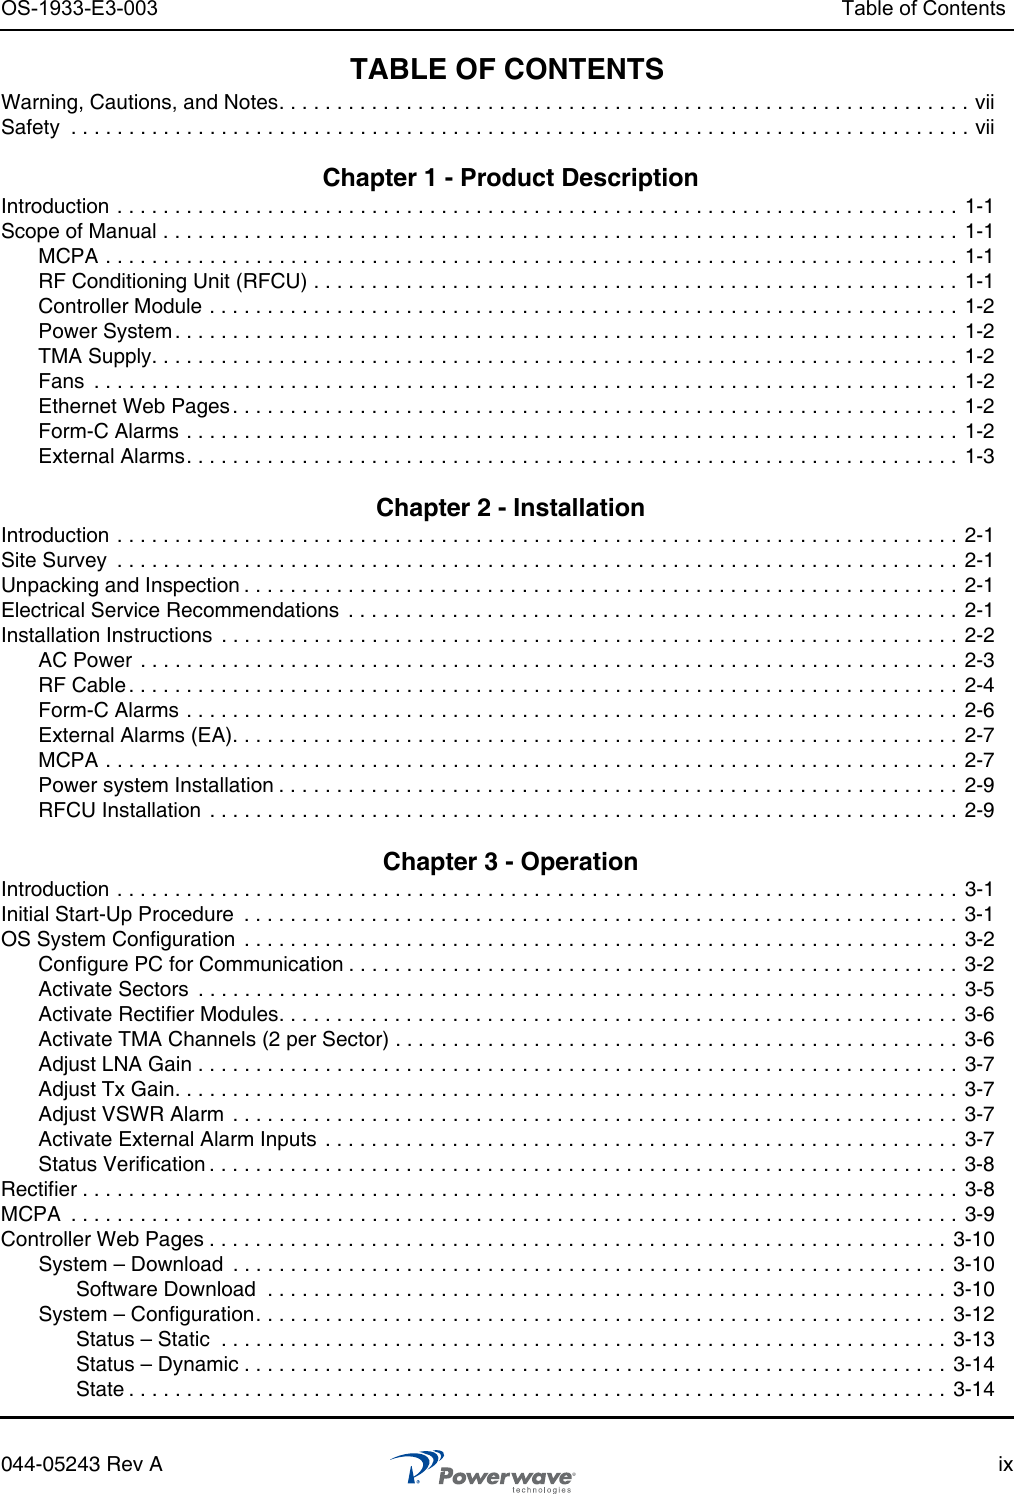 OS-1933-E3-003 Table of Contents044-05243 Rev A ixTABLE OF CONTENTSWarning, Cautions, and Notes. . . . . . . . . . . . . . . . . . . . . . . . . . . . . . . . . . . . . . . . . . . . . . . . . . . . . . . . . . . . viiSafety  . . . . . . . . . . . . . . . . . . . . . . . . . . . . . . . . . . . . . . . . . . . . . . . . . . . . . . . . . . . . . . . . . . . . . . . . . . . . . . vii Chapter 1 - Product Description Introduction . . . . . . . . . . . . . . . . . . . . . . . . . . . . . . . . . . . . . . . . . . . . . . . . . . . . . . . . . . . . . . . . . . . . . . . . . 1-1Scope of Manual . . . . . . . . . . . . . . . . . . . . . . . . . . . . . . . . . . . . . . . . . . . . . . . . . . . . . . . . . . . . . . . . . . . . . 1-1MCPA . . . . . . . . . . . . . . . . . . . . . . . . . . . . . . . . . . . . . . . . . . . . . . . . . . . . . . . . . . . . . . . . . . . . . . . . . . 1-1RF Conditioning Unit (RFCU) . . . . . . . . . . . . . . . . . . . . . . . . . . . . . . . . . . . . . . . . . . . . . . . . . . . . . . . .  1-1Controller Module . . . . . . . . . . . . . . . . . . . . . . . . . . . . . . . . . . . . . . . . . . . . . . . . . . . . . . . . . . . . . . . . . 1-2Power System . . . . . . . . . . . . . . . . . . . . . . . . . . . . . . . . . . . . . . . . . . . . . . . . . . . . . . . . . . . . . . . . . . . .  1-2TMA Supply. . . . . . . . . . . . . . . . . . . . . . . . . . . . . . . . . . . . . . . . . . . . . . . . . . . . . . . . . . . . . . . . . . . . . . 1-2Fans  . . . . . . . . . . . . . . . . . . . . . . . . . . . . . . . . . . . . . . . . . . . . . . . . . . . . . . . . . . . . . . . . . . . . . . . . . . .  1-2Ethernet Web Pages . . . . . . . . . . . . . . . . . . . . . . . . . . . . . . . . . . . . . . . . . . . . . . . . . . . . . . . . . . . . . . .  1-2Form-C Alarms . . . . . . . . . . . . . . . . . . . . . . . . . . . . . . . . . . . . . . . . . . . . . . . . . . . . . . . . . . . . . . . . . . .  1-2External Alarms. . . . . . . . . . . . . . . . . . . . . . . . . . . . . . . . . . . . . . . . . . . . . . . . . . . . . . . . . . . . . . . . . . .  1-3 Chapter 2 - Installation Introduction . . . . . . . . . . . . . . . . . . . . . . . . . . . . . . . . . . . . . . . . . . . . . . . . . . . . . . . . . . . . . . . . . . . . . . . . . 2-1Site Survey  . . . . . . . . . . . . . . . . . . . . . . . . . . . . . . . . . . . . . . . . . . . . . . . . . . . . . . . . . . . . . . . . . . . . . . . . .  2-1Unpacking and Inspection . . . . . . . . . . . . . . . . . . . . . . . . . . . . . . . . . . . . . . . . . . . . . . . . . . . . . . . . . . . . . .  2-1Electrical Service Recommendations  . . . . . . . . . . . . . . . . . . . . . . . . . . . . . . . . . . . . . . . . . . . . . . . . . . . . . 2-1Installation Instructions  . . . . . . . . . . . . . . . . . . . . . . . . . . . . . . . . . . . . . . . . . . . . . . . . . . . . . . . . . . . . . . . .  2-2AC Power  . . . . . . . . . . . . . . . . . . . . . . . . . . . . . . . . . . . . . . . . . . . . . . . . . . . . . . . . . . . . . . . . . . . . . . .  2-3RF Cable. . . . . . . . . . . . . . . . . . . . . . . . . . . . . . . . . . . . . . . . . . . . . . . . . . . . . . . . . . . . . . . . . . . . . . . . 2-4Form-C Alarms . . . . . . . . . . . . . . . . . . . . . . . . . . . . . . . . . . . . . . . . . . . . . . . . . . . . . . . . . . . . . . . . . . .  2-6External Alarms (EA). . . . . . . . . . . . . . . . . . . . . . . . . . . . . . . . . . . . . . . . . . . . . . . . . . . . . . . . . . . . . . .  2-7MCPA . . . . . . . . . . . . . . . . . . . . . . . . . . . . . . . . . . . . . . . . . . . . . . . . . . . . . . . . . . . . . . . . . . . . . . . . . . 2-7Power system Installation . . . . . . . . . . . . . . . . . . . . . . . . . . . . . . . . . . . . . . . . . . . . . . . . . . . . . . . . . . . 2-9RFCU Installation  . . . . . . . . . . . . . . . . . . . . . . . . . . . . . . . . . . . . . . . . . . . . . . . . . . . . . . . . . . . . . . . . . 2-9 Chapter 3 - Operation Introduction . . . . . . . . . . . . . . . . . . . . . . . . . . . . . . . . . . . . . . . . . . . . . . . . . . . . . . . . . . . . . . . . . . . . . . . . . 3-1Initial Start-Up Procedure  . . . . . . . . . . . . . . . . . . . . . . . . . . . . . . . . . . . . . . . . . . . . . . . . . . . . . . . . . . . . . .  3-1OS System Configuration  . . . . . . . . . . . . . . . . . . . . . . . . . . . . . . . . . . . . . . . . . . . . . . . . . . . . . . . . . . . . . . 3-2Configure PC for Communication . . . . . . . . . . . . . . . . . . . . . . . . . . . . . . . . . . . . . . . . . . . . . . . . . . . . . 3-2Activate Sectors  . . . . . . . . . . . . . . . . . . . . . . . . . . . . . . . . . . . . . . . . . . . . . . . . . . . . . . . . . . . . . . . . . . 3-5Activate Rectifier Modules. . . . . . . . . . . . . . . . . . . . . . . . . . . . . . . . . . . . . . . . . . . . . . . . . . . . . . . . . . . 3-6Activate TMA Channels (2 per Sector) . . . . . . . . . . . . . . . . . . . . . . . . . . . . . . . . . . . . . . . . . . . . . . . . .  3-6Adjust LNA Gain . . . . . . . . . . . . . . . . . . . . . . . . . . . . . . . . . . . . . . . . . . . . . . . . . . . . . . . . . . . . . . . . . . 3-7Adjust Tx Gain. . . . . . . . . . . . . . . . . . . . . . . . . . . . . . . . . . . . . . . . . . . . . . . . . . . . . . . . . . . . . . . . . . . . 3-7Adjust VSWR Alarm  . . . . . . . . . . . . . . . . . . . . . . . . . . . . . . . . . . . . . . . . . . . . . . . . . . . . . . . . . . . . . . . 3-7Activate External Alarm Inputs  . . . . . . . . . . . . . . . . . . . . . . . . . . . . . . . . . . . . . . . . . . . . . . . . . . . . . . . 3-7Status Verification . . . . . . . . . . . . . . . . . . . . . . . . . . . . . . . . . . . . . . . . . . . . . . . . . . . . . . . . . . . . . . . . . 3-8Rectifier . . . . . . . . . . . . . . . . . . . . . . . . . . . . . . . . . . . . . . . . . . . . . . . . . . . . . . . . . . . . . . . . . . . . . . . . . . . . 3-8MCPA  . . . . . . . . . . . . . . . . . . . . . . . . . . . . . . . . . . . . . . . . . . . . . . . . . . . . . . . . . . . . . . . . . . . . . . . . . . . . .  3-9Controller Web Pages . . . . . . . . . . . . . . . . . . . . . . . . . . . . . . . . . . . . . . . . . . . . . . . . . . . . . . . . . . . . . . . .  3-10System – Download  . . . . . . . . . . . . . . . . . . . . . . . . . . . . . . . . . . . . . . . . . . . . . . . . . . . . . . . . . . . . . . 3-10Software Download  . . . . . . . . . . . . . . . . . . . . . . . . . . . . . . . . . . . . . . . . . . . . . . . . . . . . . . . . . . .  3-10System – Configuration. . . . . . . . . . . . . . . . . . . . . . . . . . . . . . . . . . . . . . . . . . . . . . . . . . . . . . . . . . . . 3-12Status – Static  . . . . . . . . . . . . . . . . . . . . . . . . . . . . . . . . . . . . . . . . . . . . . . . . . . . . . . . . . . . . . . .  3-13Status – Dynamic . . . . . . . . . . . . . . . . . . . . . . . . . . . . . . . . . . . . . . . . . . . . . . . . . . . . . . . . . . . . .  3-14State . . . . . . . . . . . . . . . . . . . . . . . . . . . . . . . . . . . . . . . . . . . . . . . . . . . . . . . . . . . . . . . . . . . . . . .  3-14